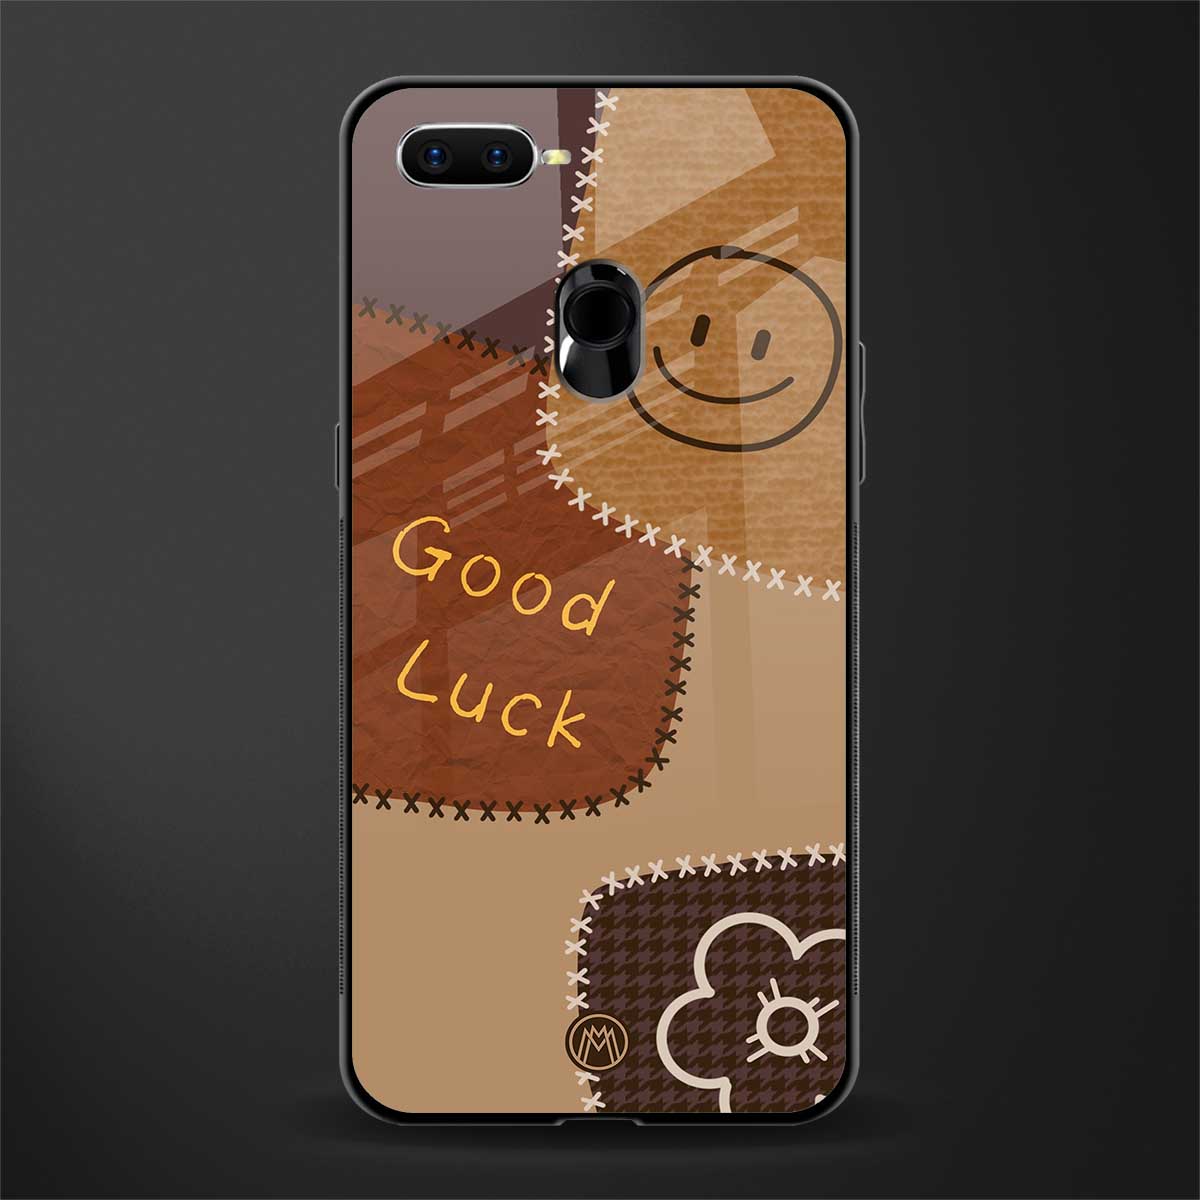 good luck glass case for realme 2 pro image